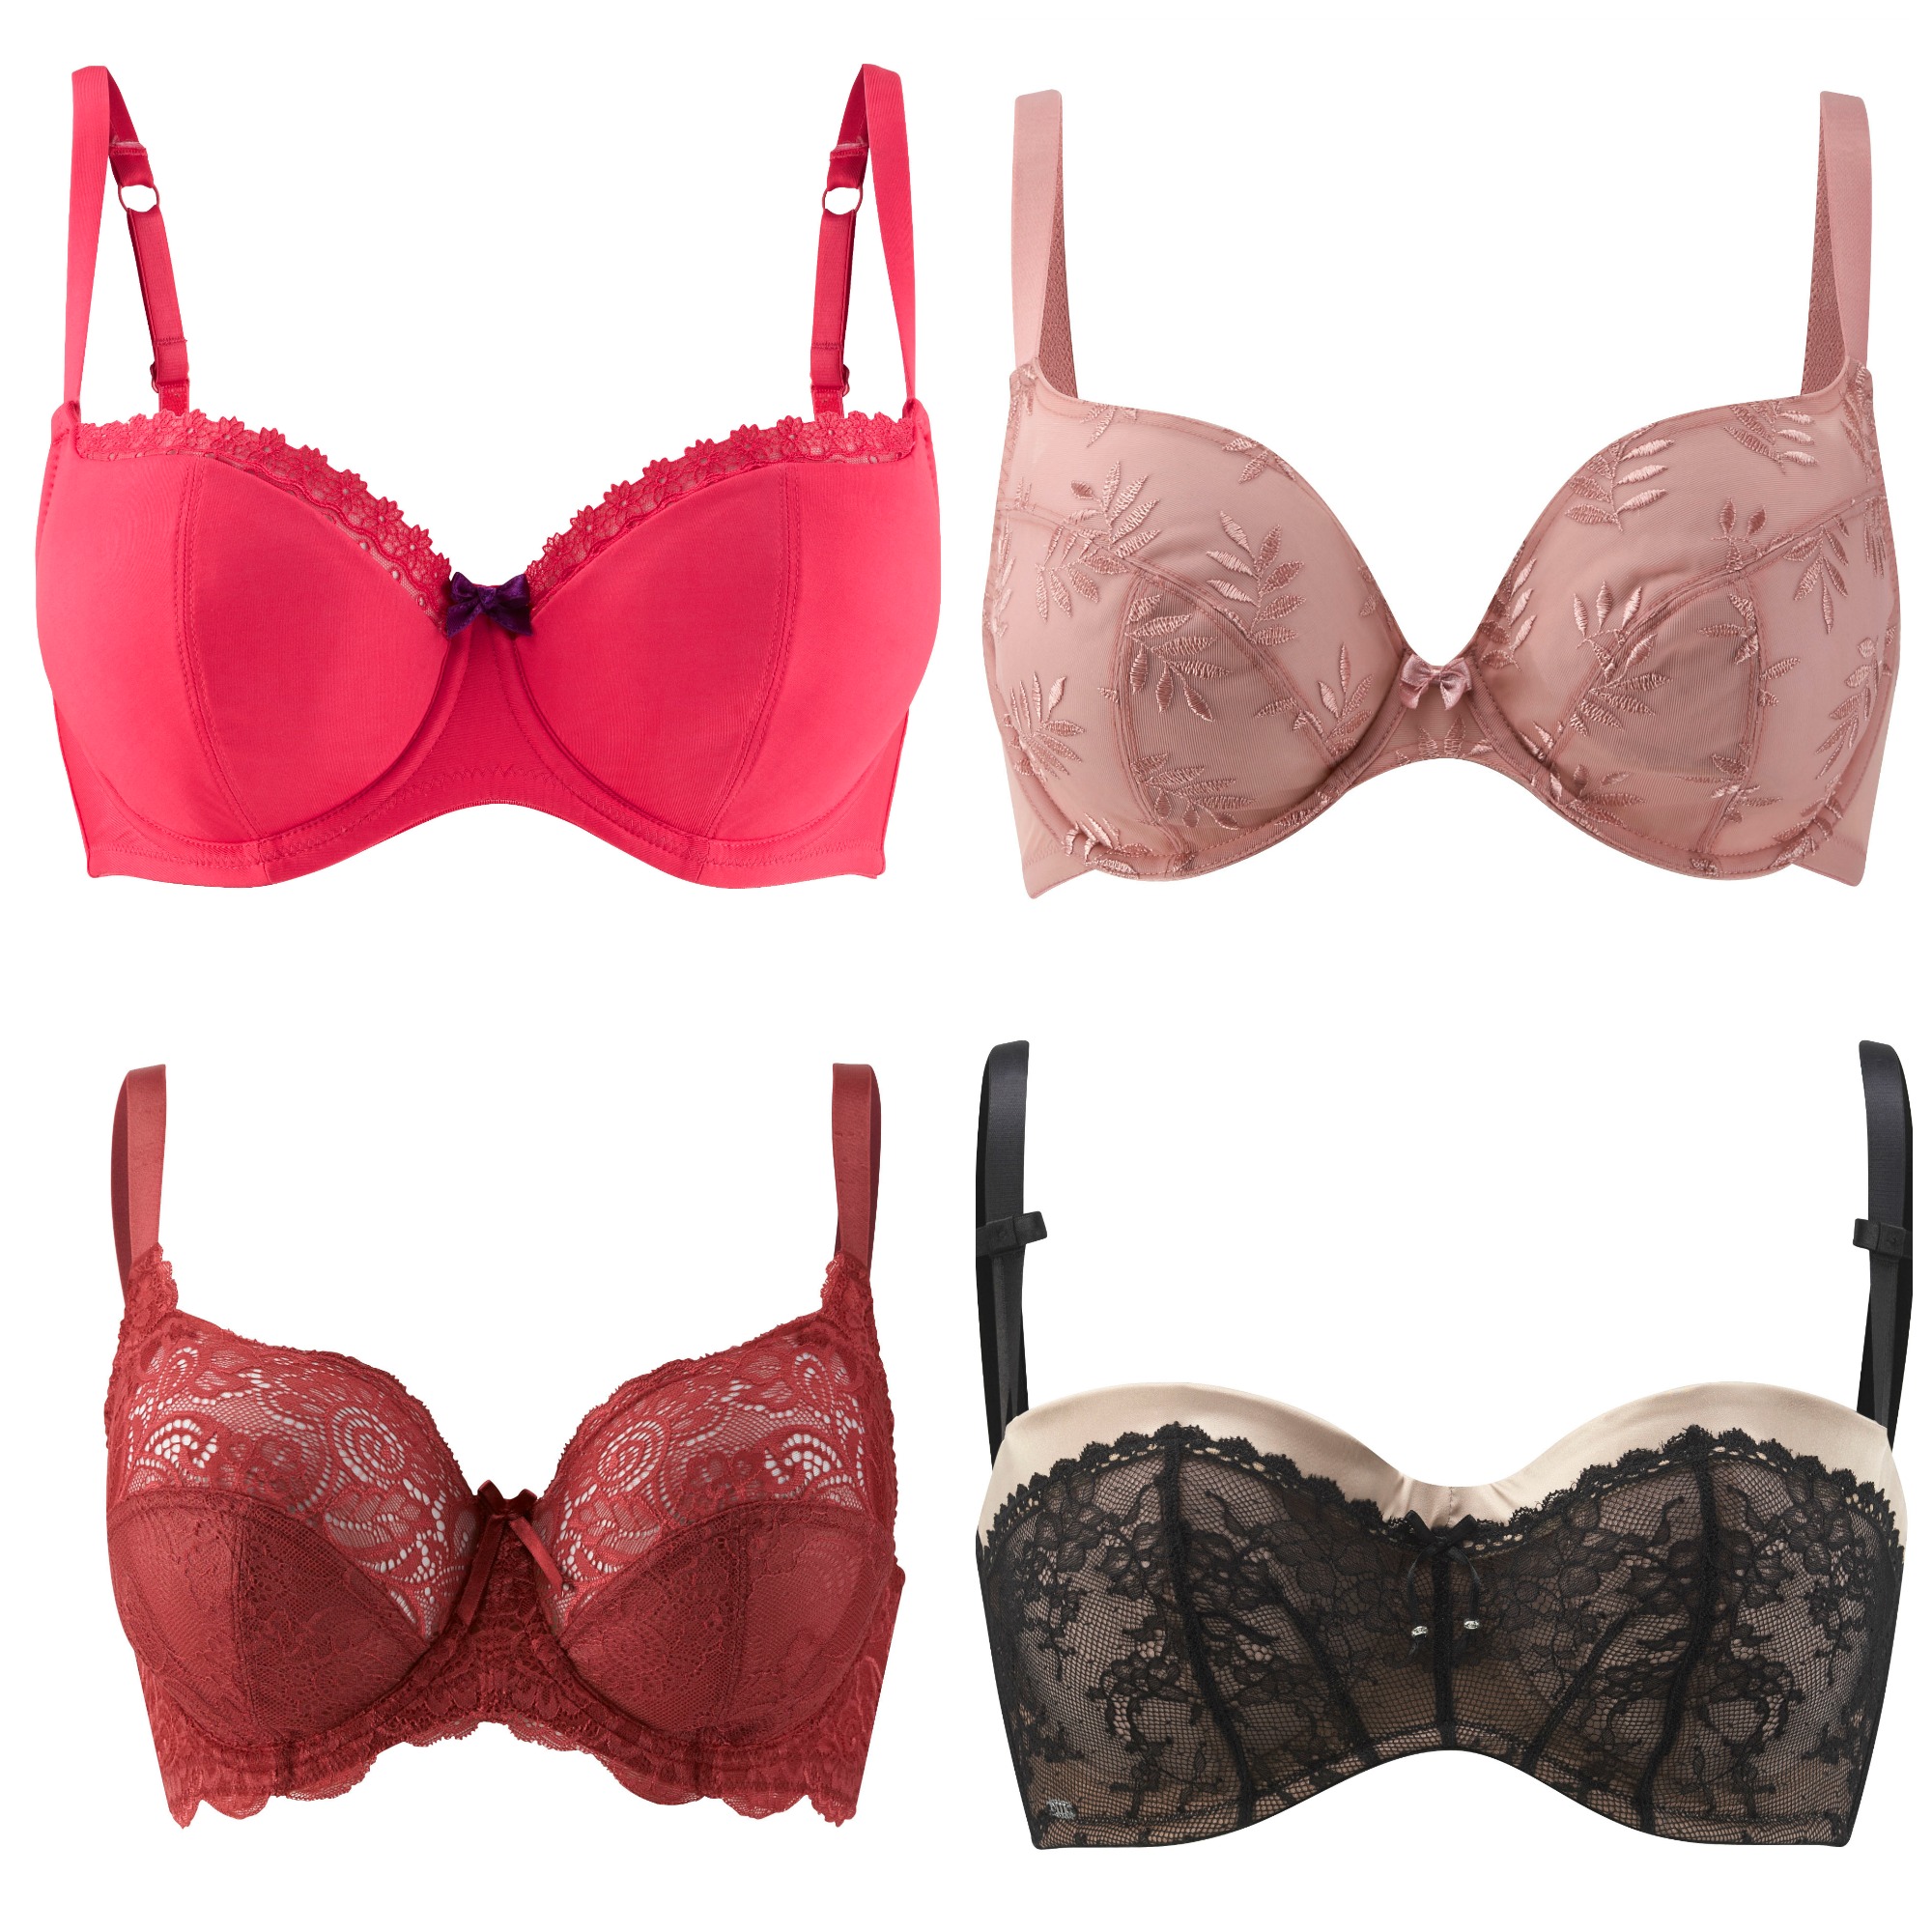 On Breasts, Bras, and Why I Hate Victoria's Secret